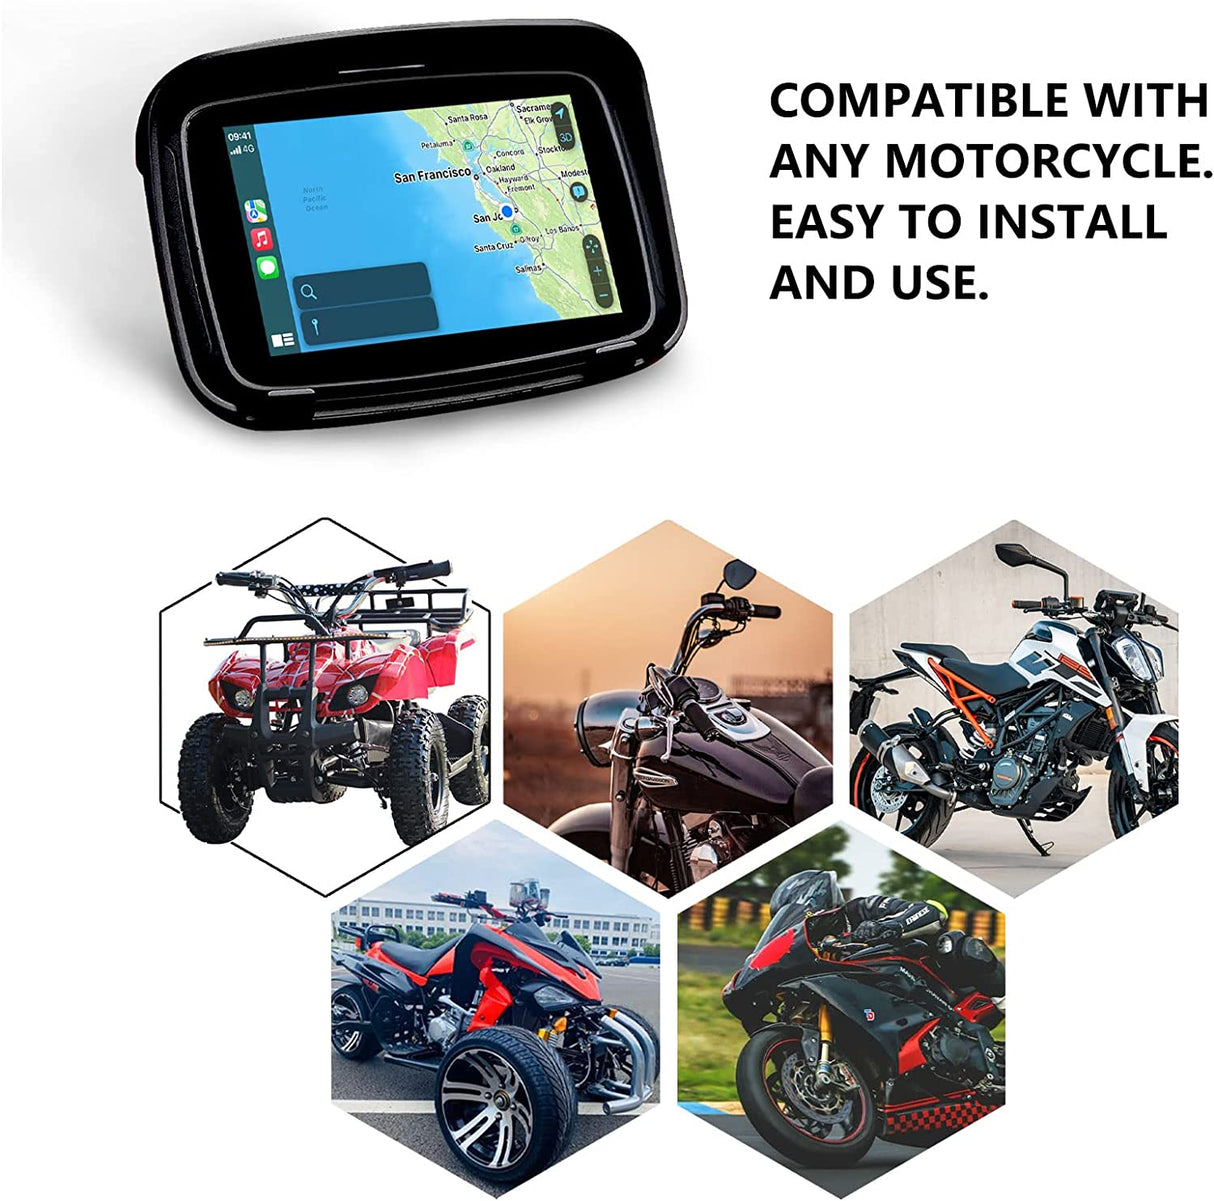 Road Top Portable Wireless Apple Carplay/Wireless Android Auto Touchscreen  for Motorcycle, 5 IPS Touch Screen, IPX7 Waterproof, GPS Navigation via